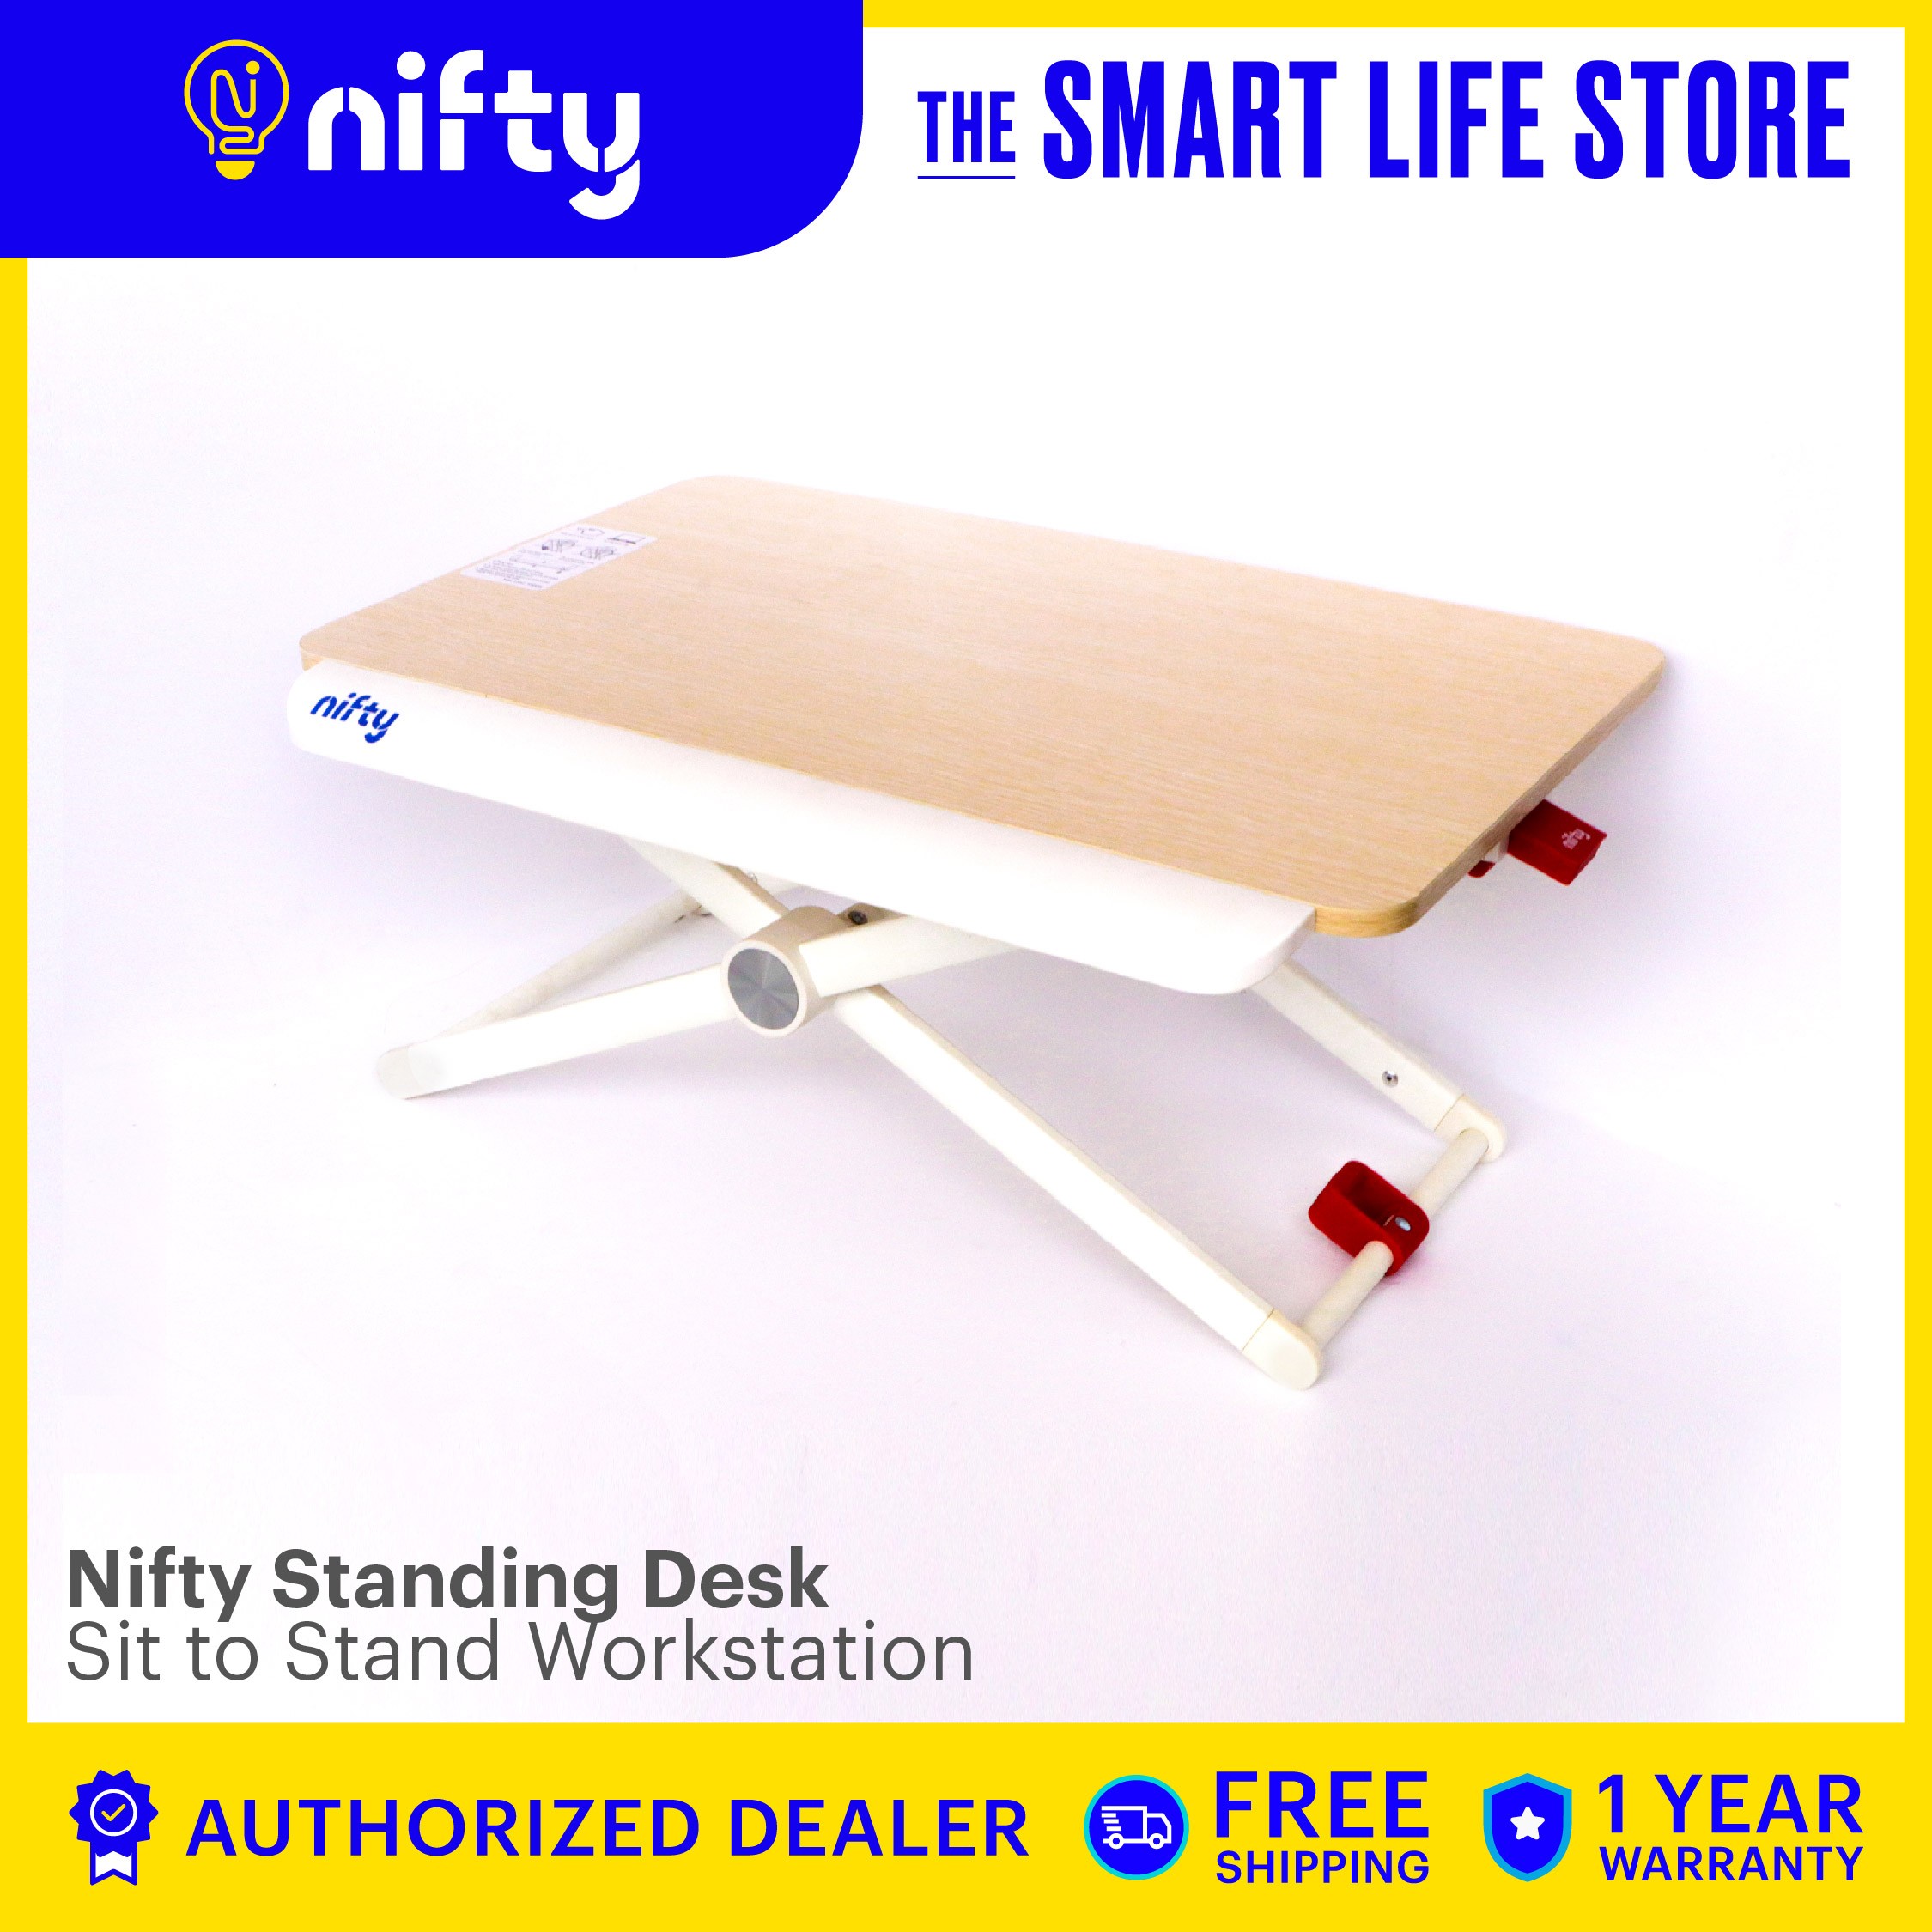 Nifty standing desk